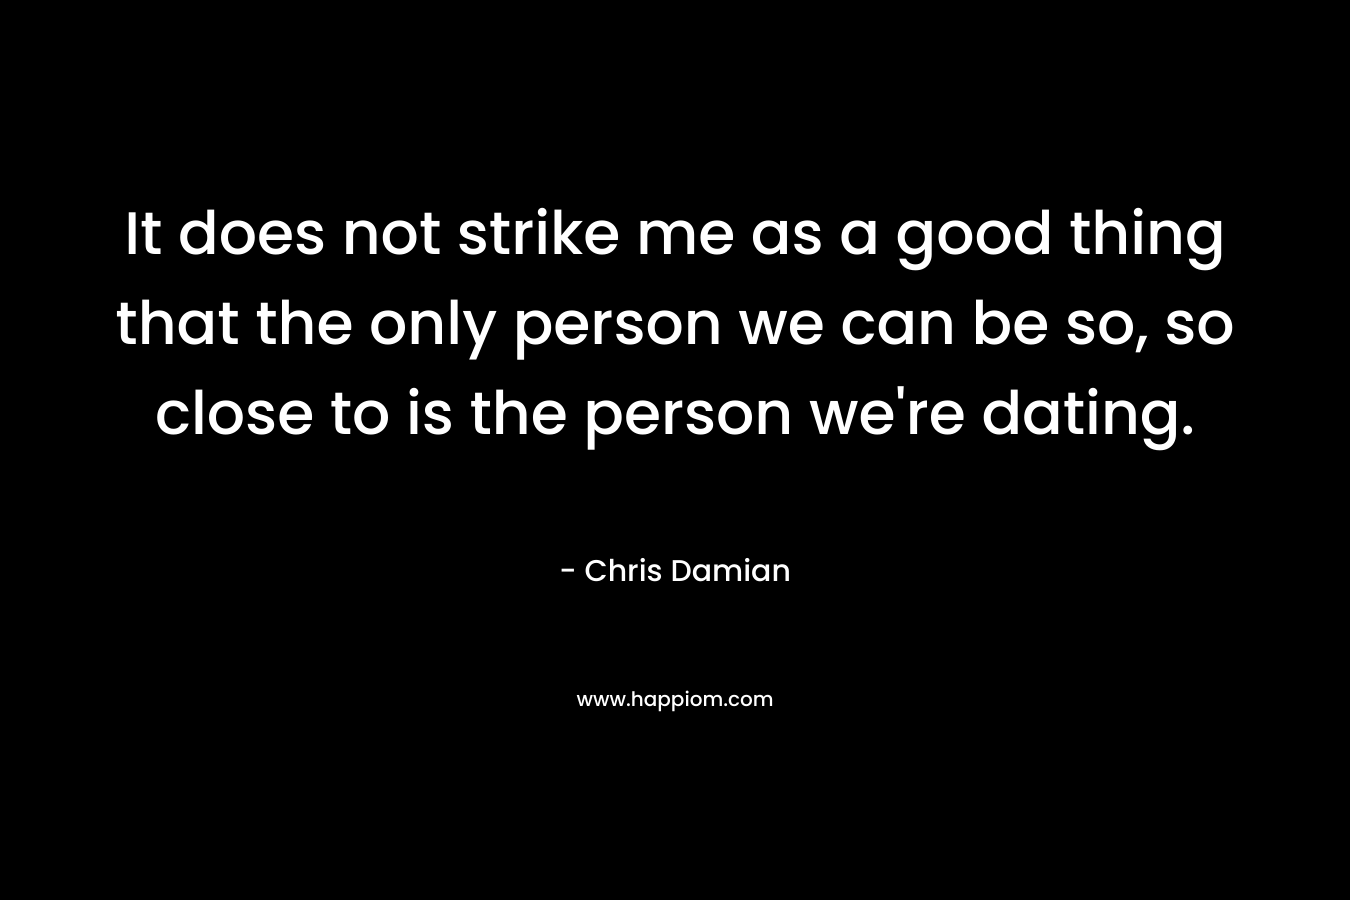 It does not strike me as a good thing that the only person we can be so, so close to is the person we're dating.